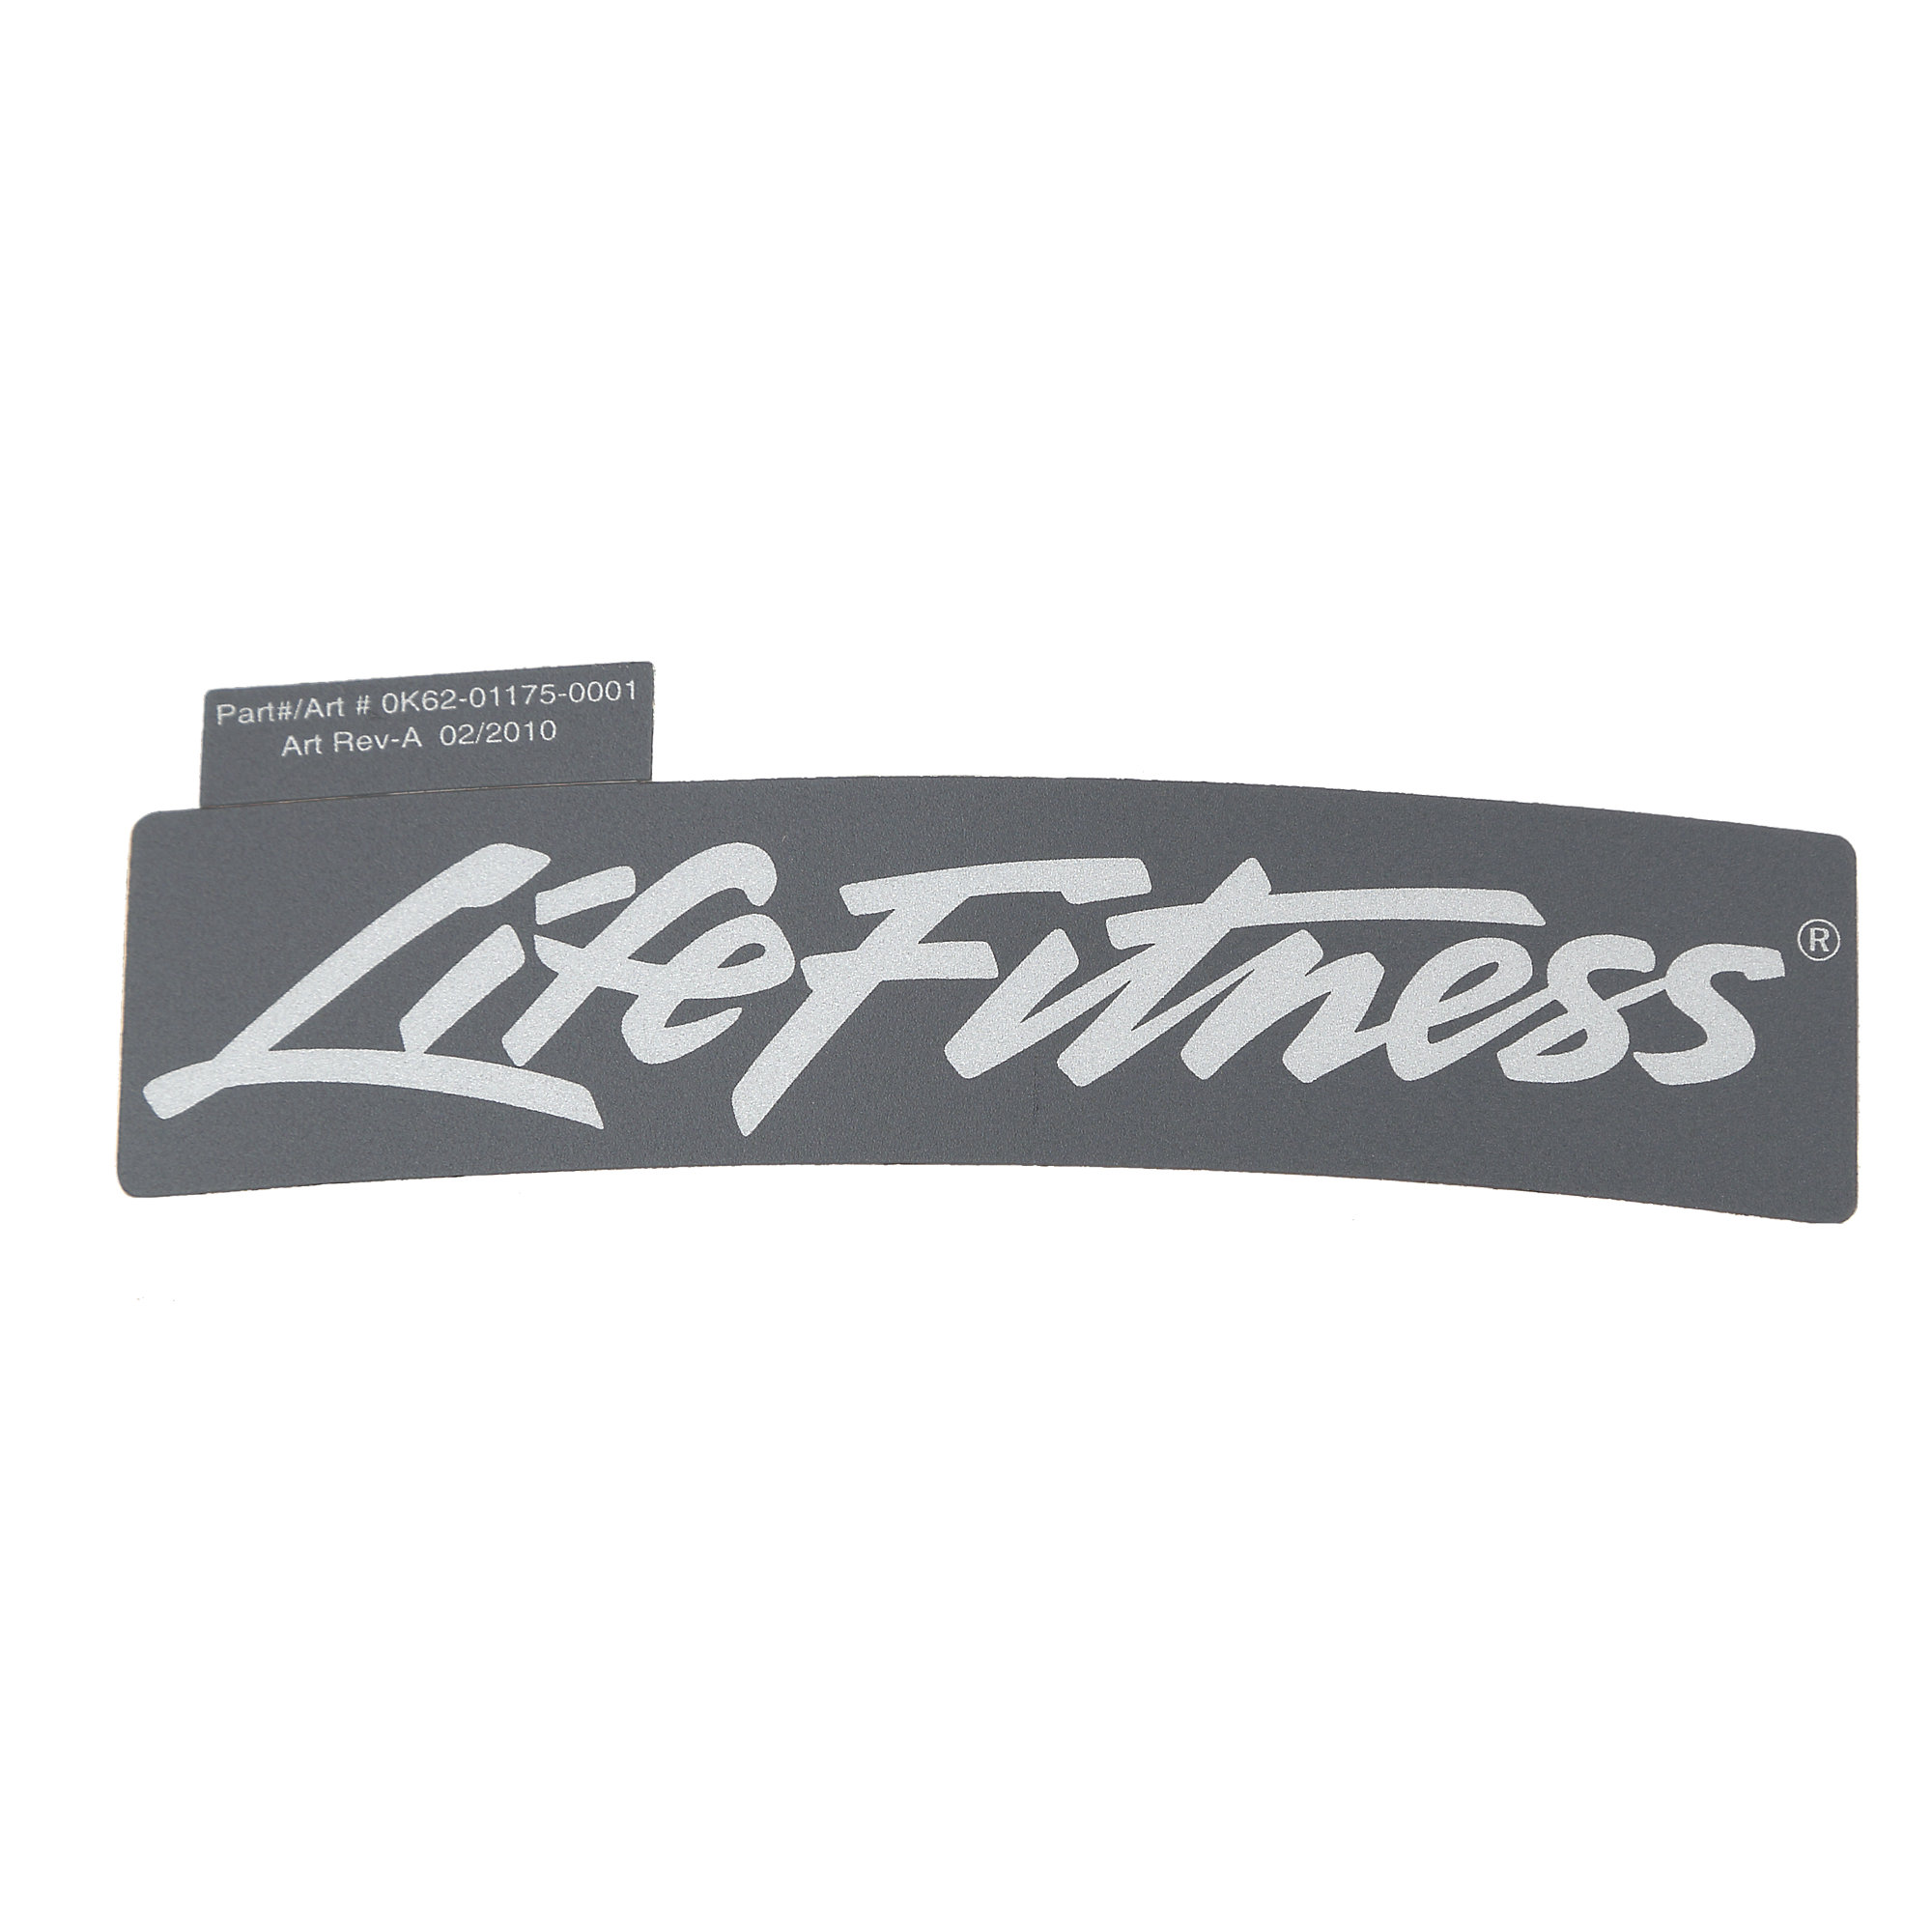 Decal: Integrity Console Rear, Lifefitness